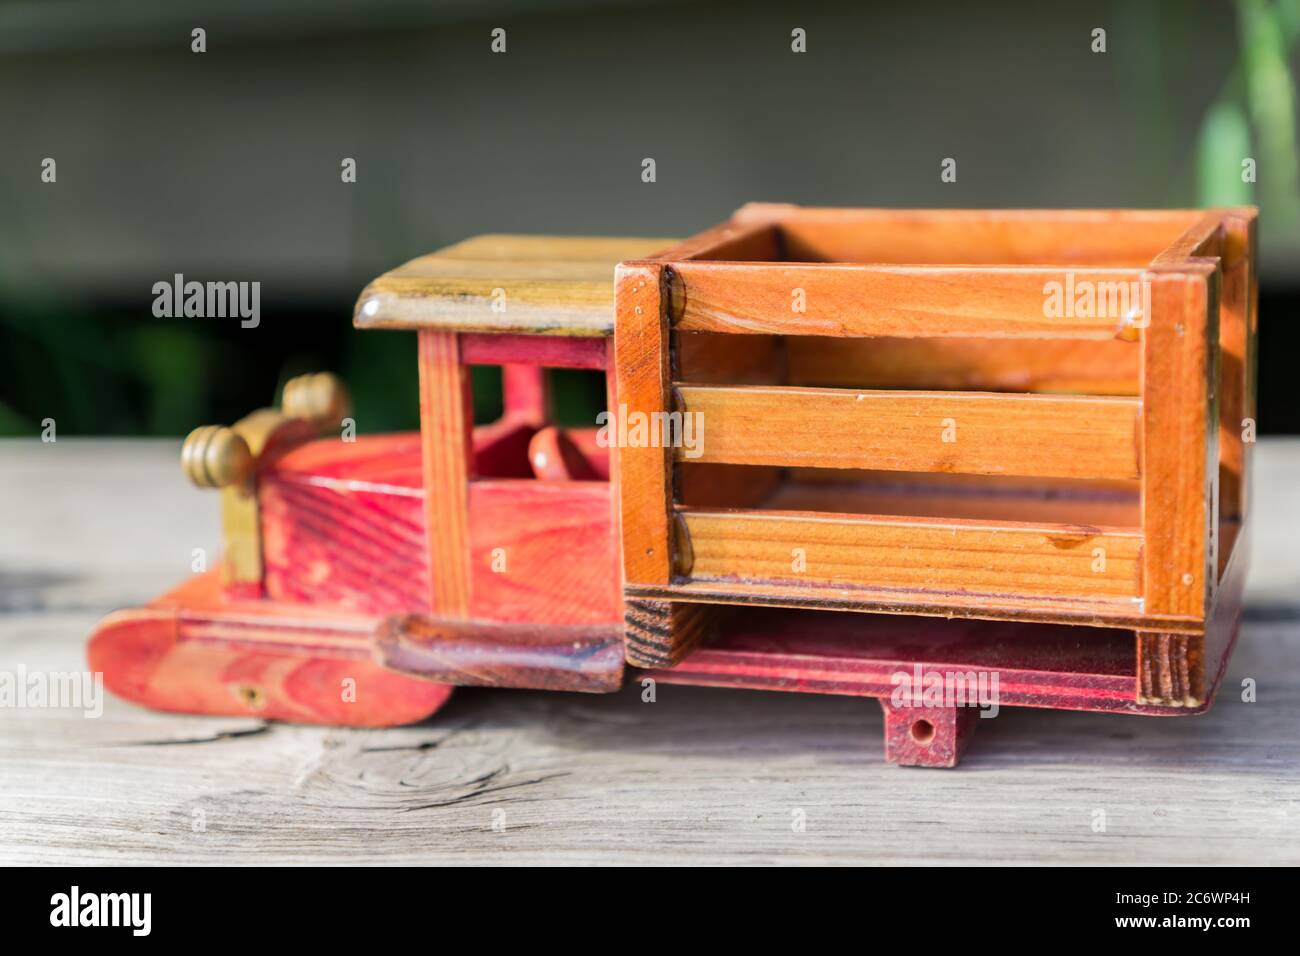 Wooden Toy Truck Stock Photo 133591721